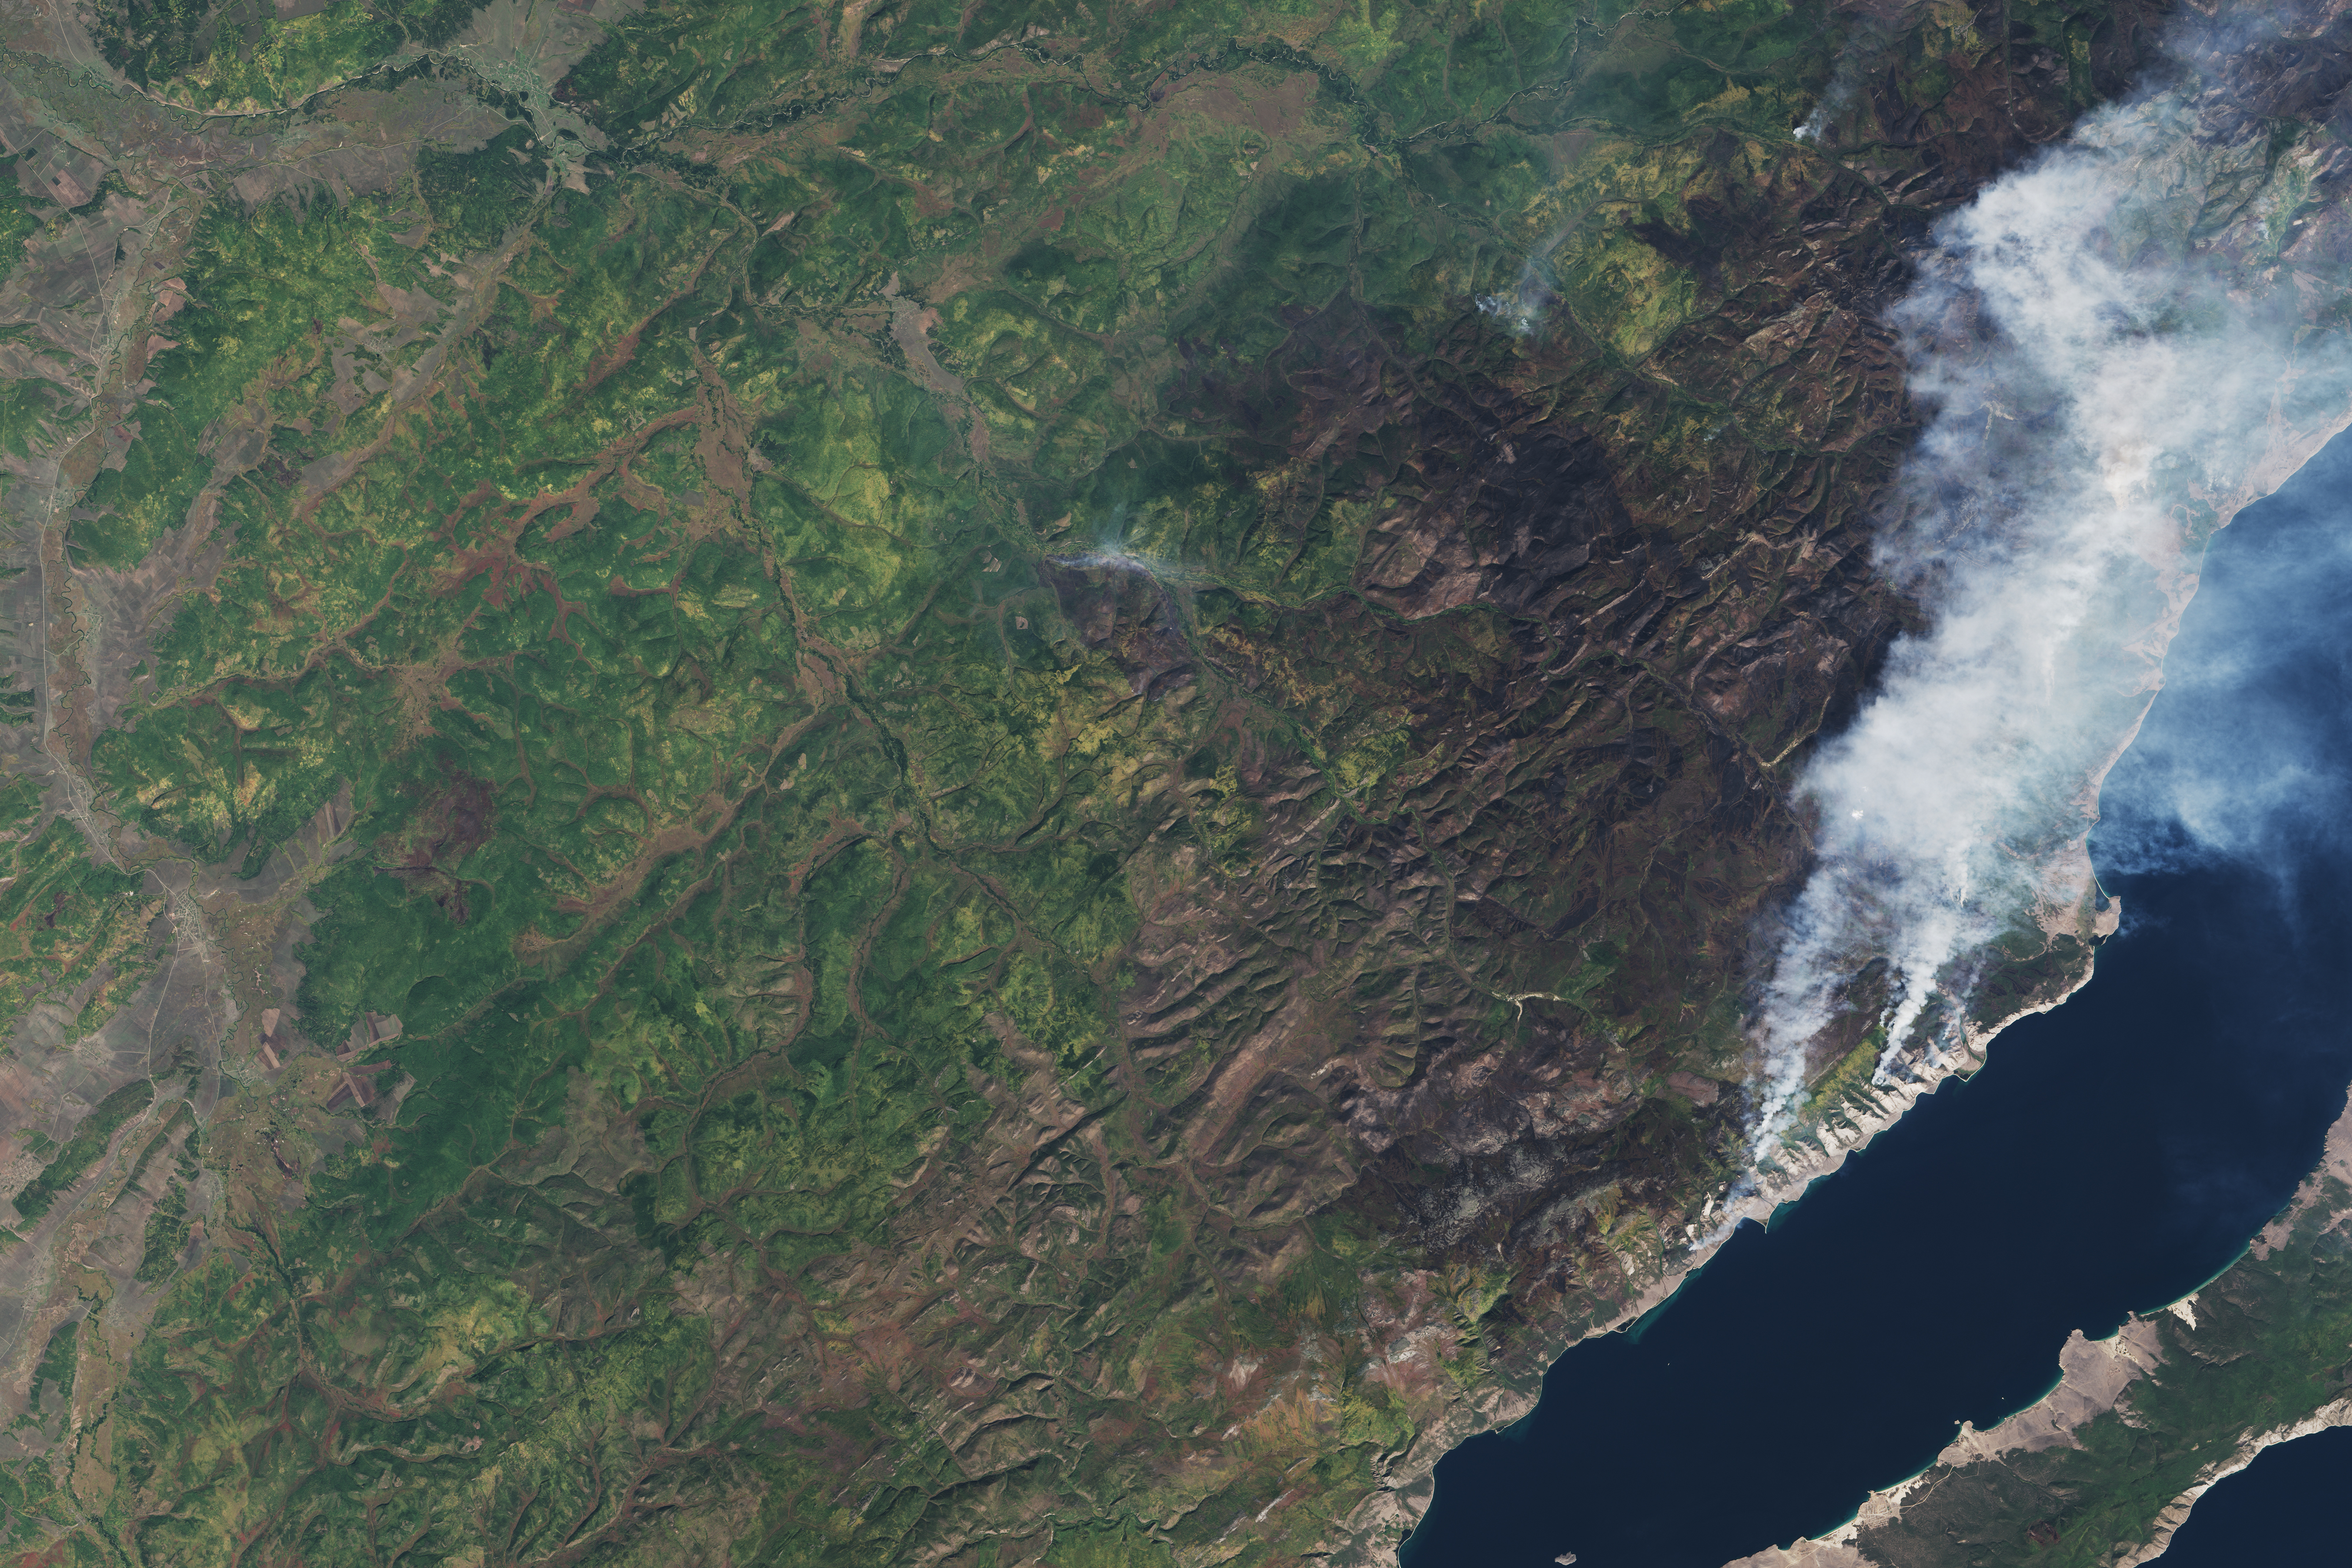 Fire and Smoke Lingers Around Lake Baikal - related image preview